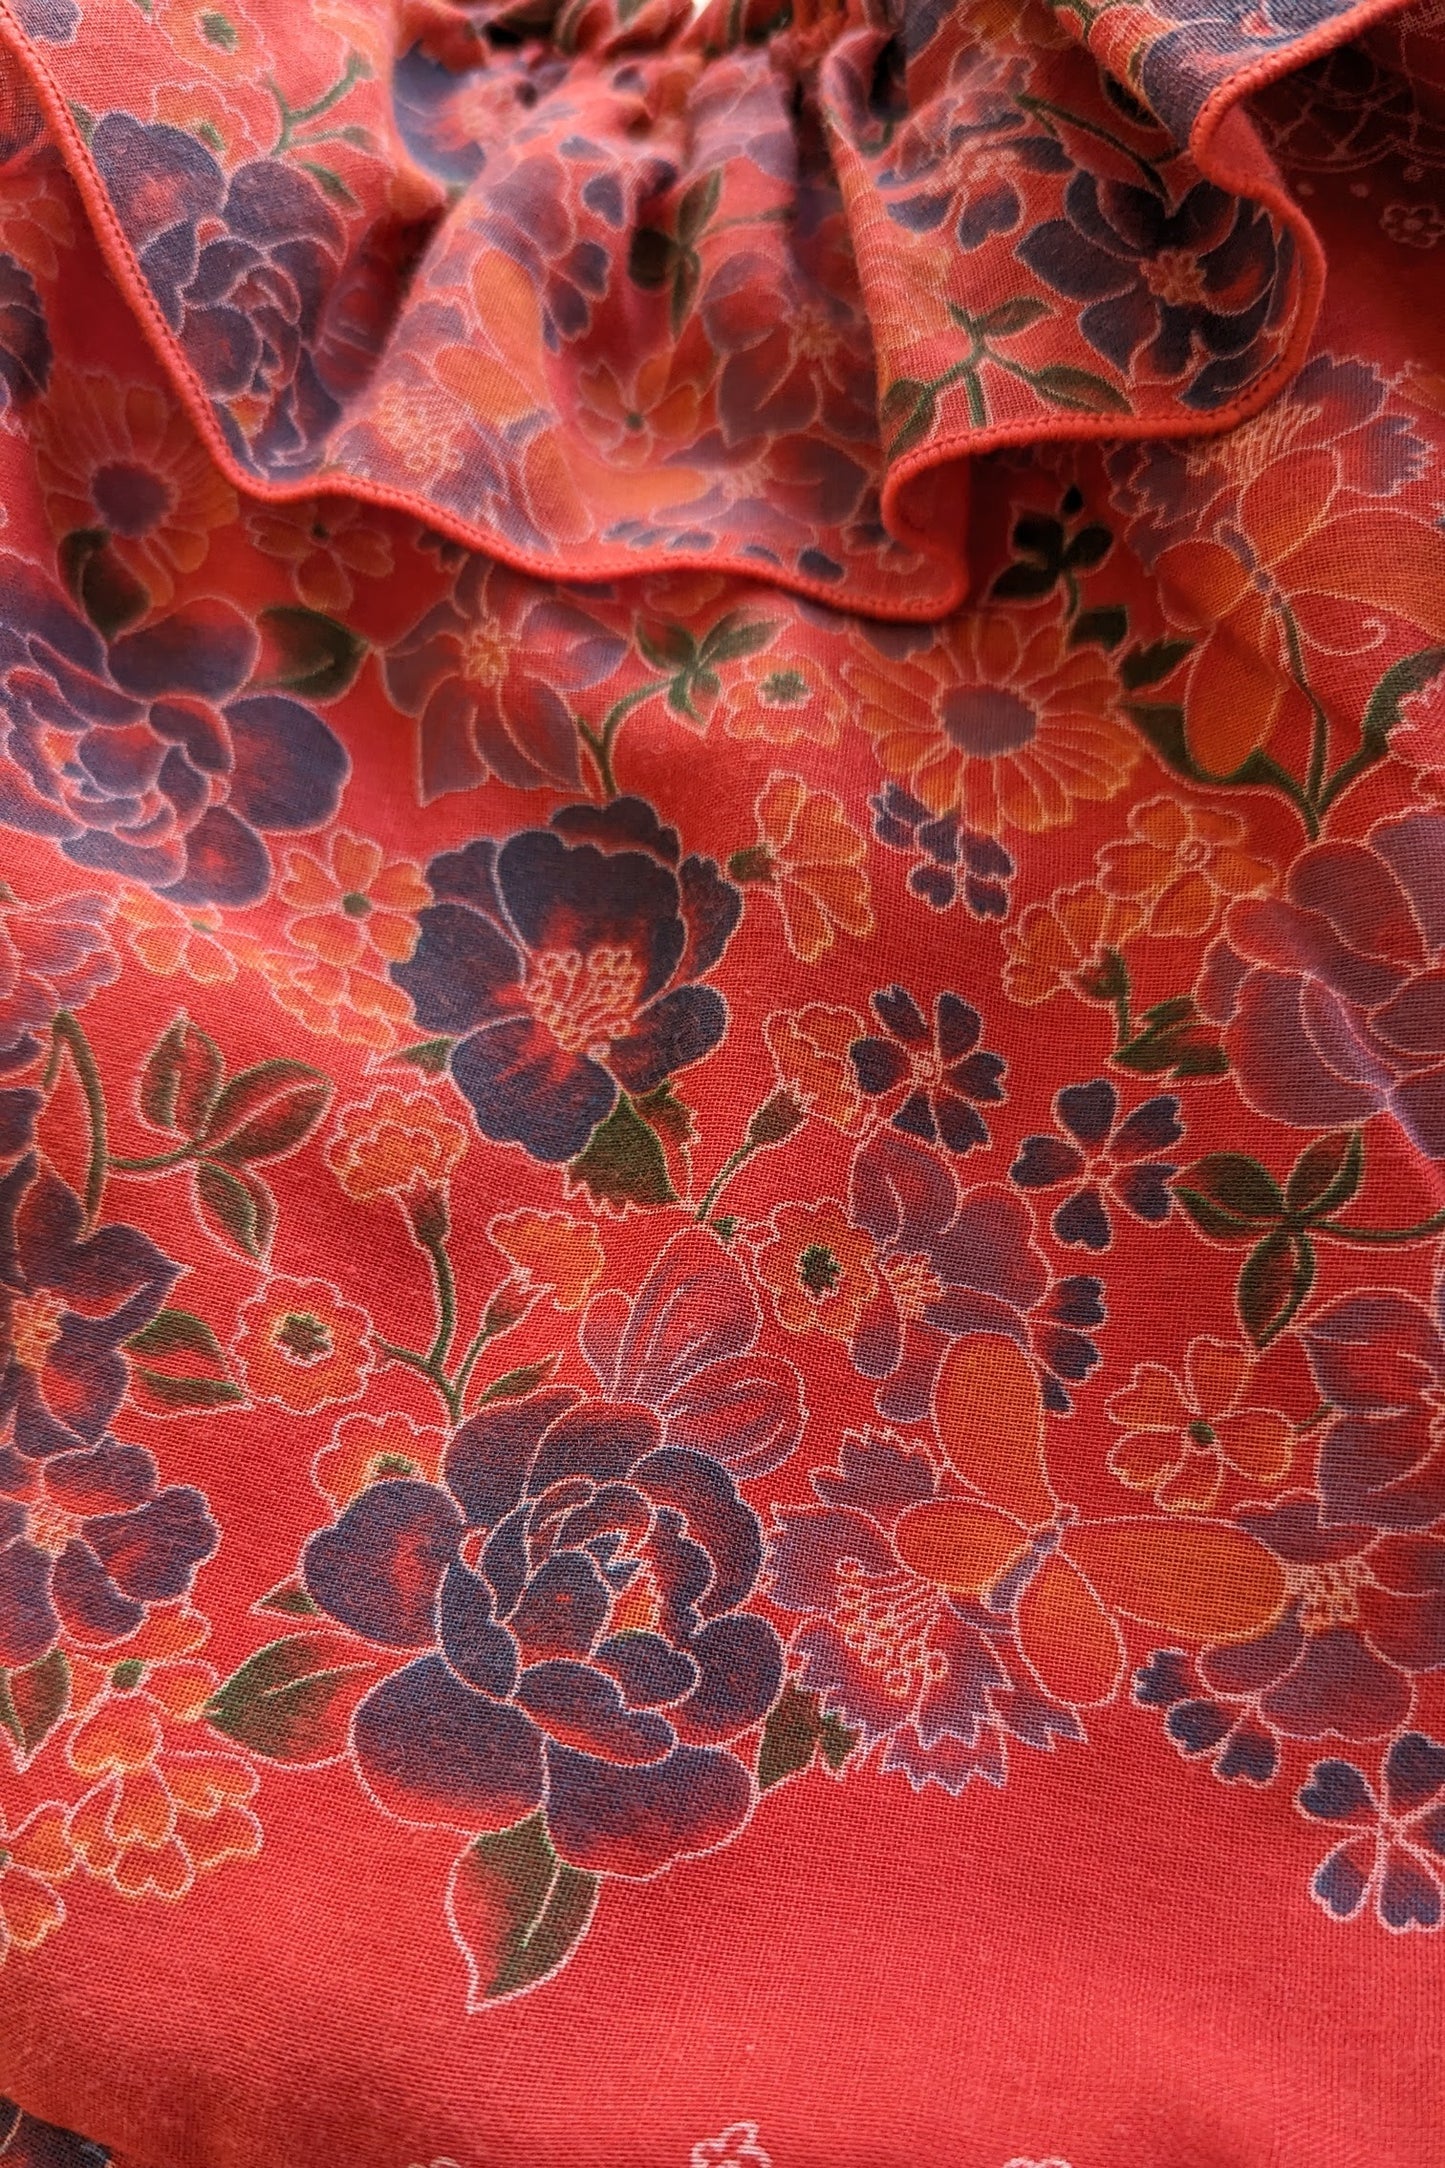 fabric of 1970s Red Summer off the Shoulder Dress